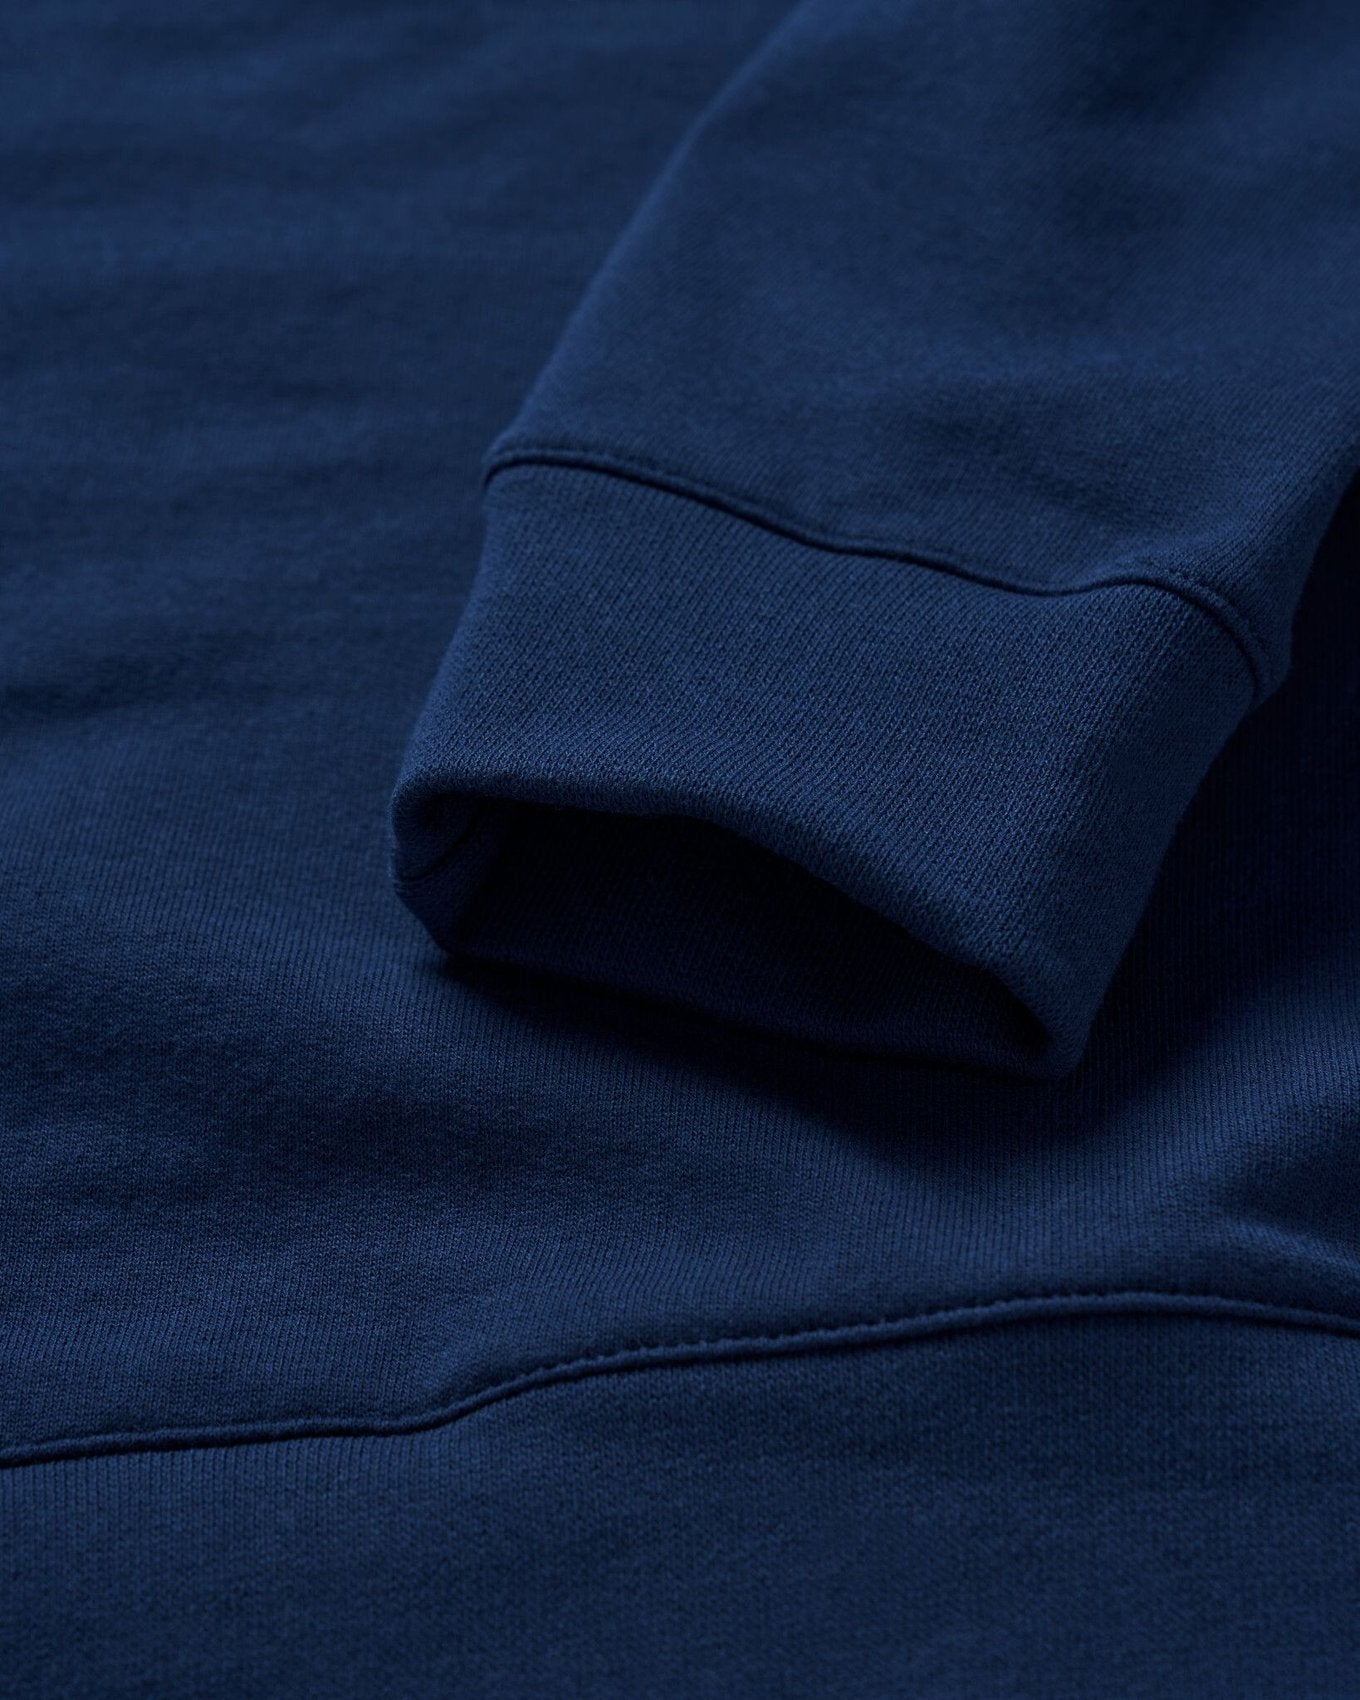 ReApparel Baby Crew Neck . in color Navy Blue and shape long sleeve